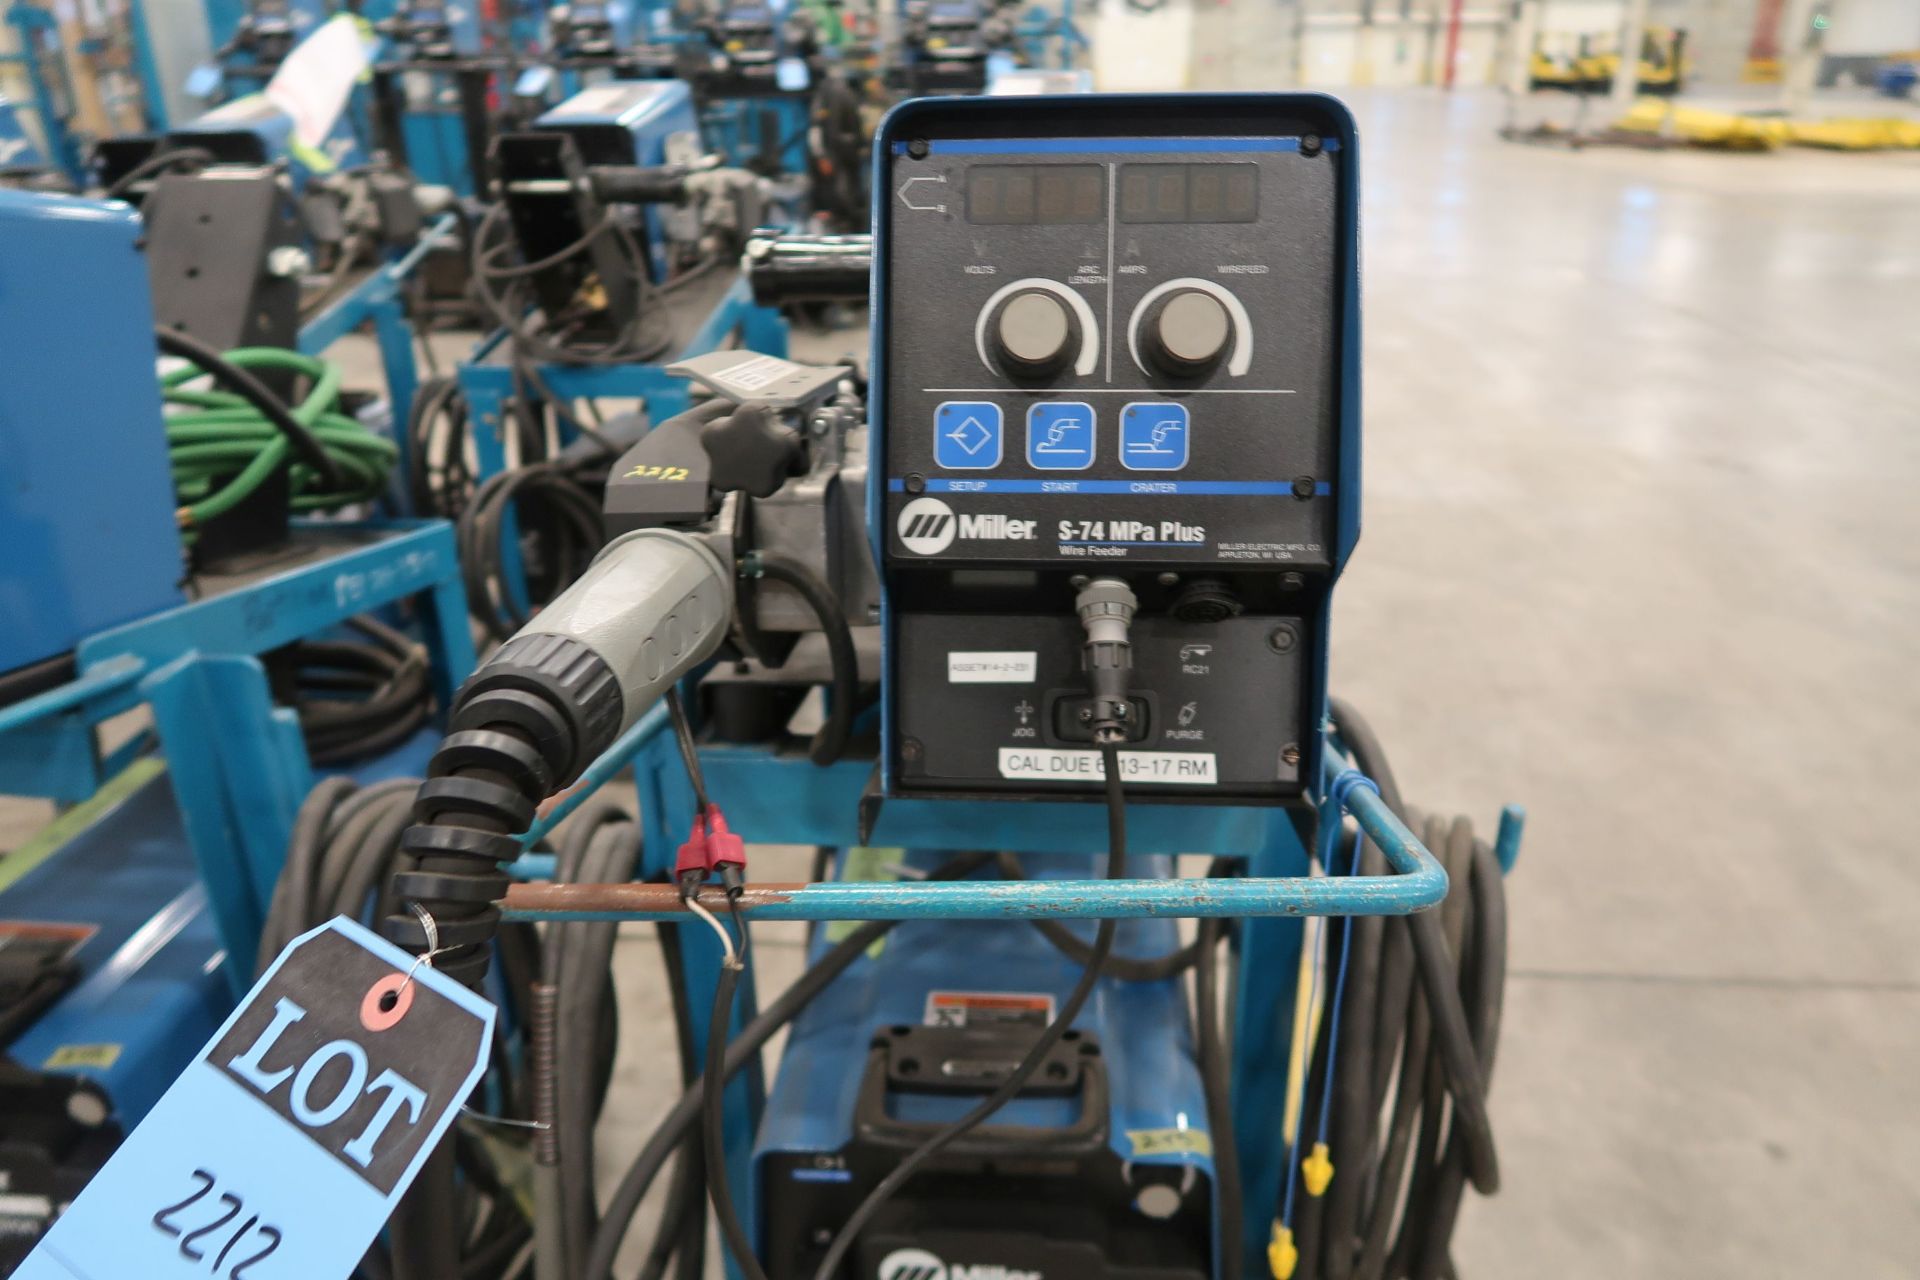 350 AMP MILLER INVISION 352 MPA WELDER WITH MILLER S-74 MPA PLUS WIRE FEEDER; FA 70113-08 - Image 3 of 3